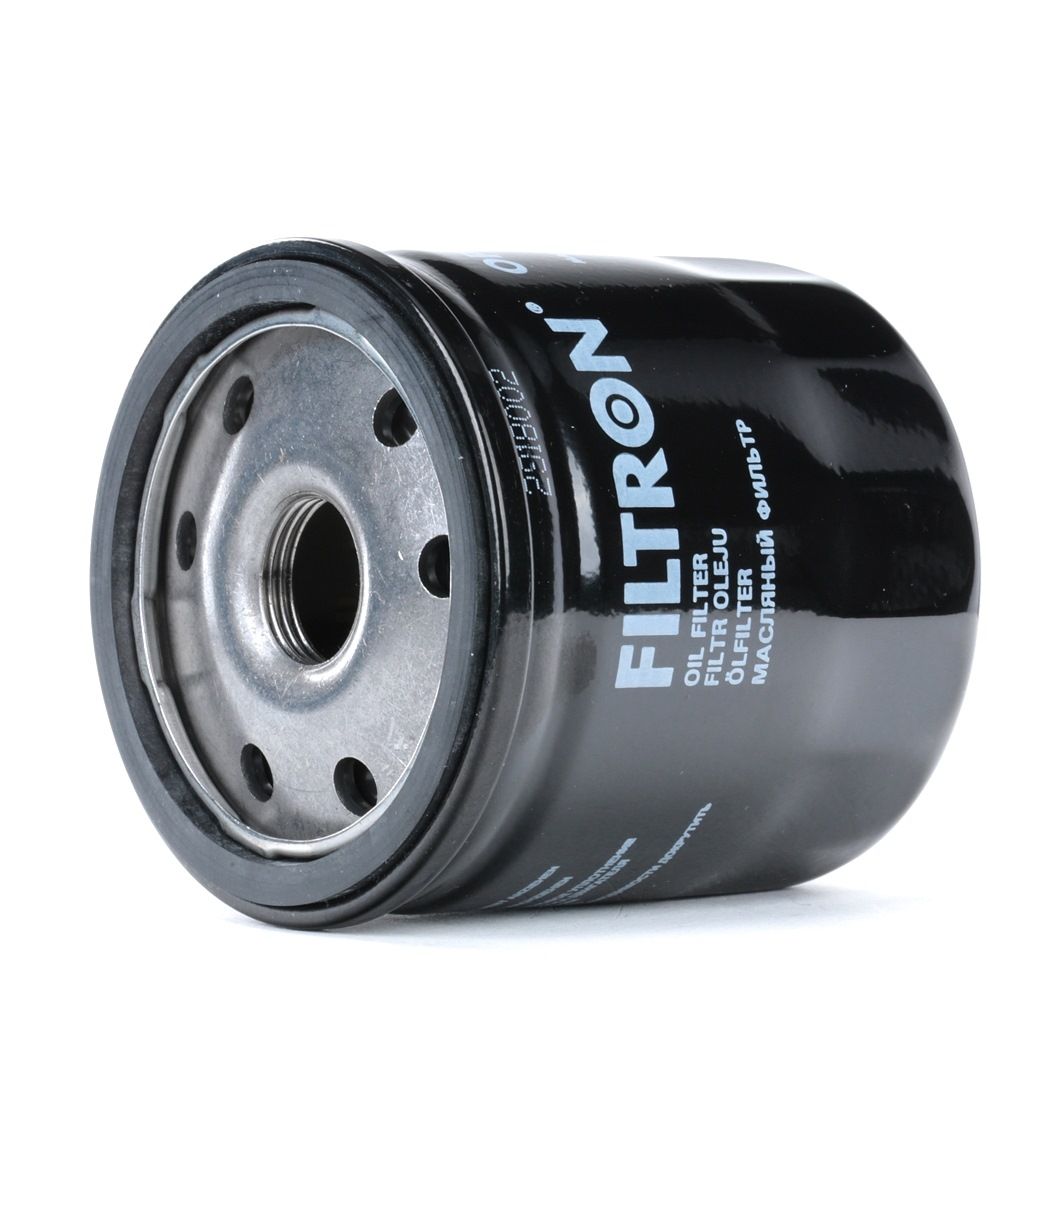 FILTRON OP 643/5 Oil filter M 20 X 1.5, Spin-on Filter